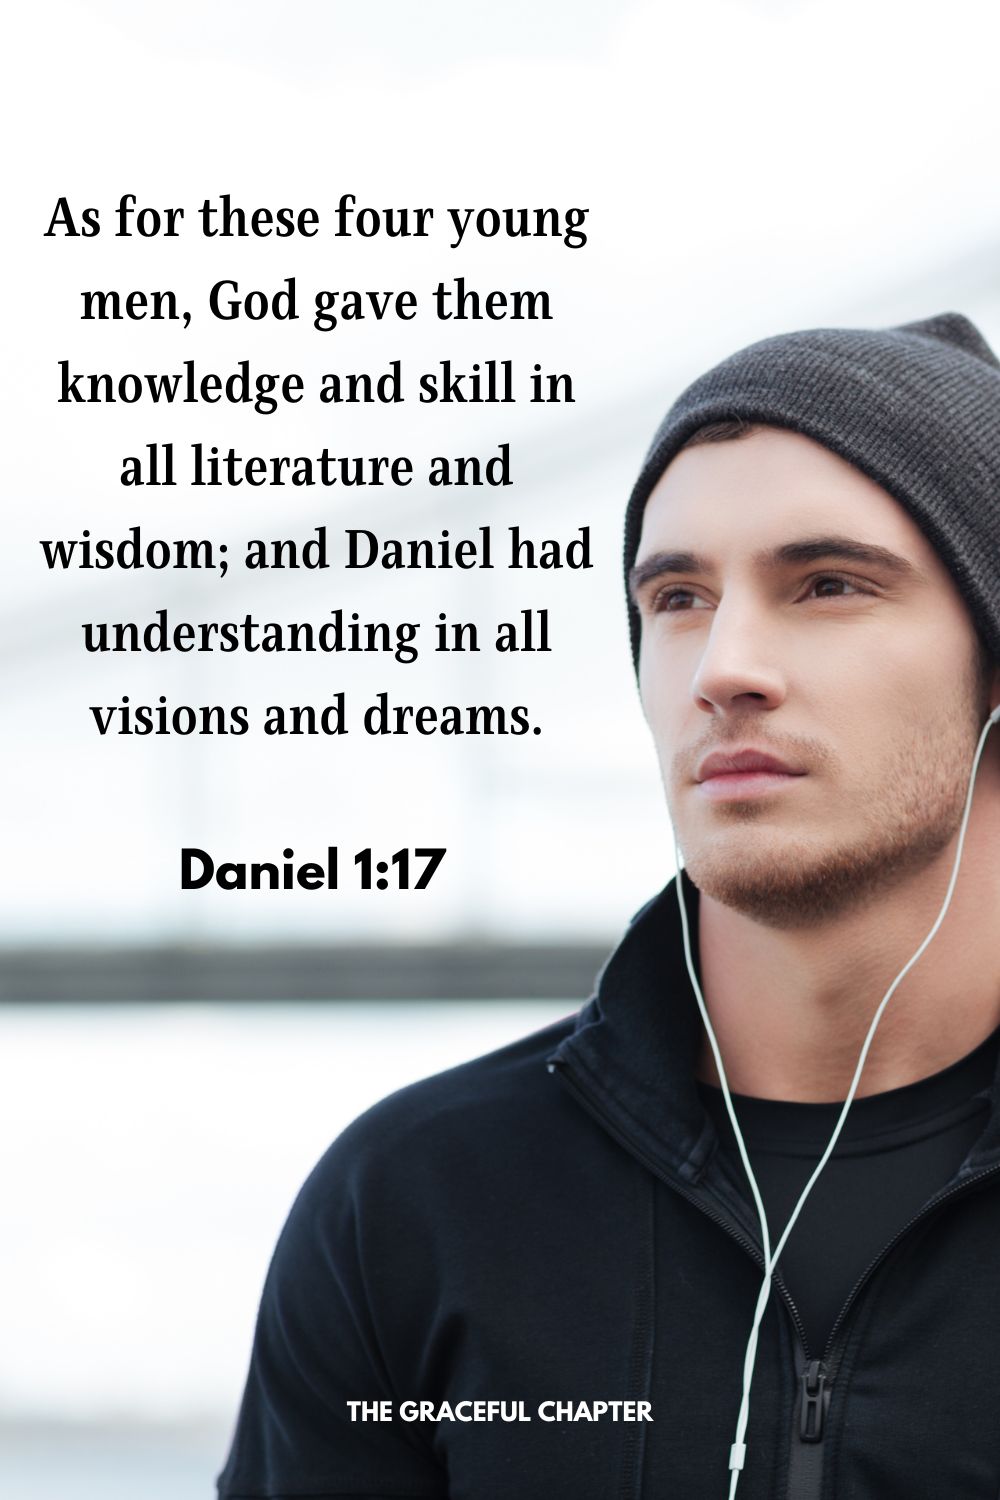 As for these four young men, God gave them knowledge and skill in all literature and wisdom; and Daniel had understanding in all visions and dreams.Daniel 1:17